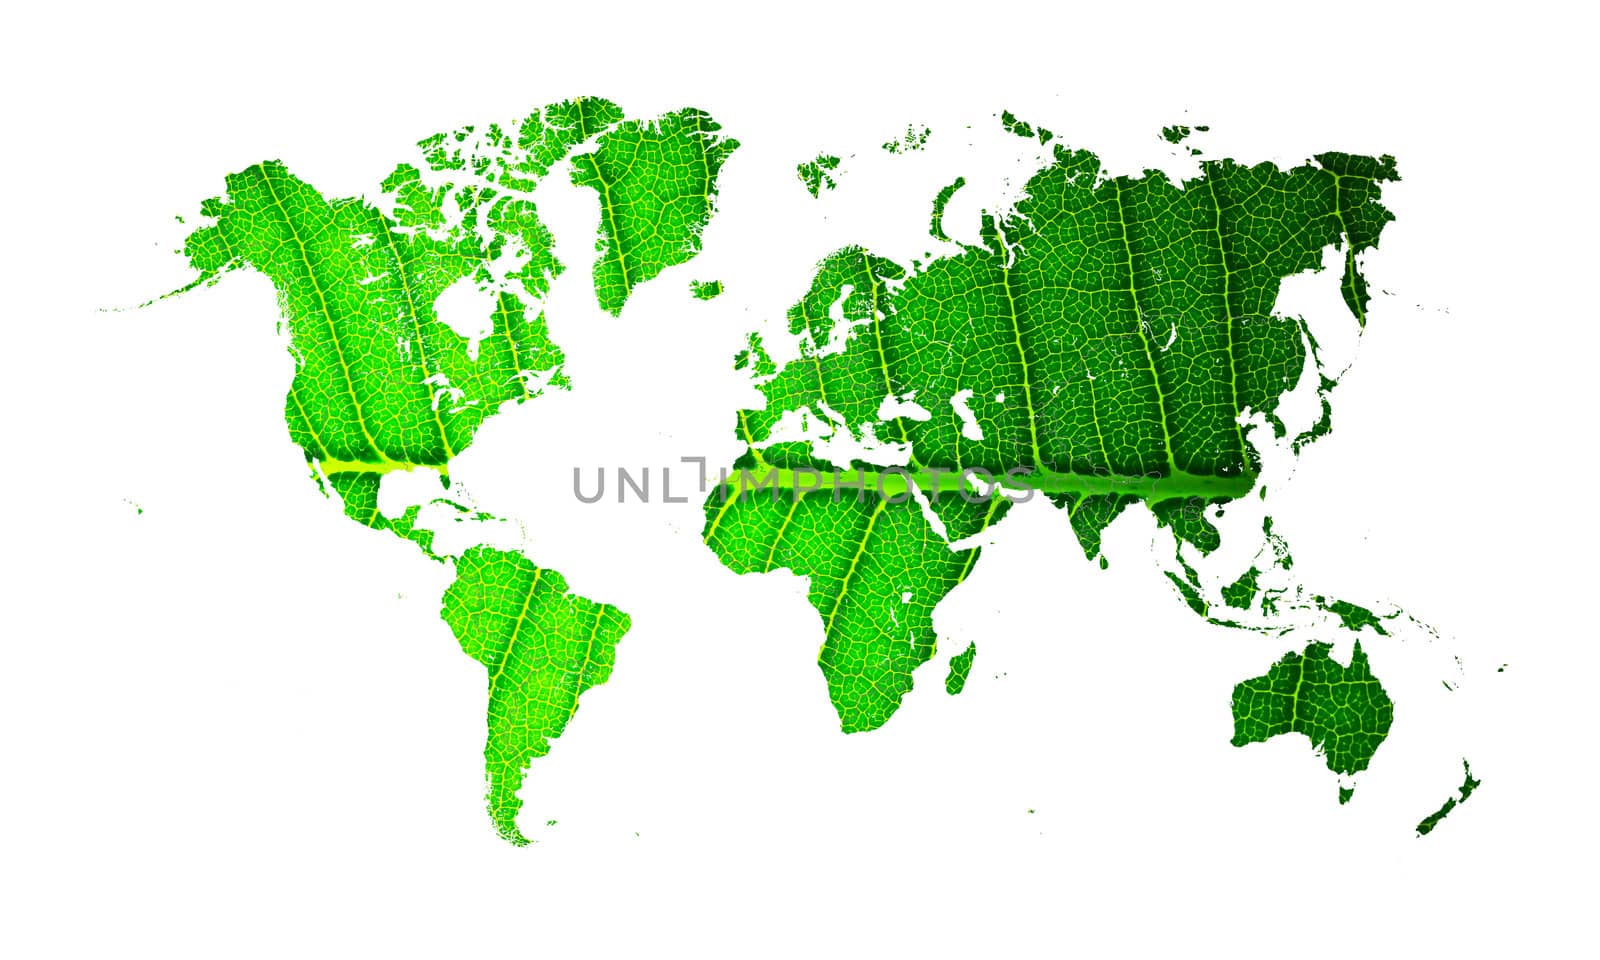 world map with leaf texture